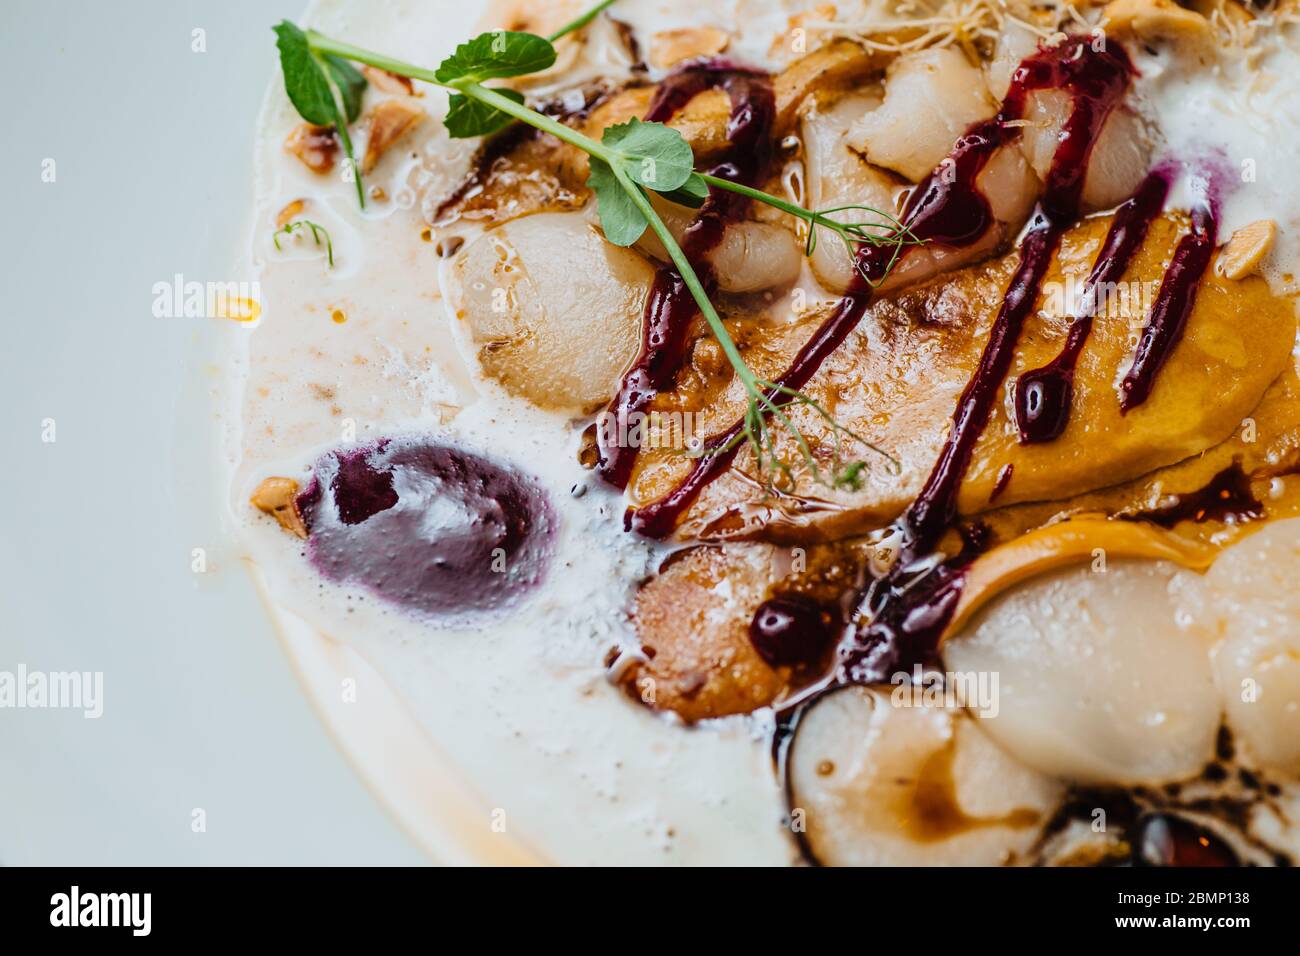 Scallop ceviche and foie gras with hazelnut, ready to serve. Stock Photo